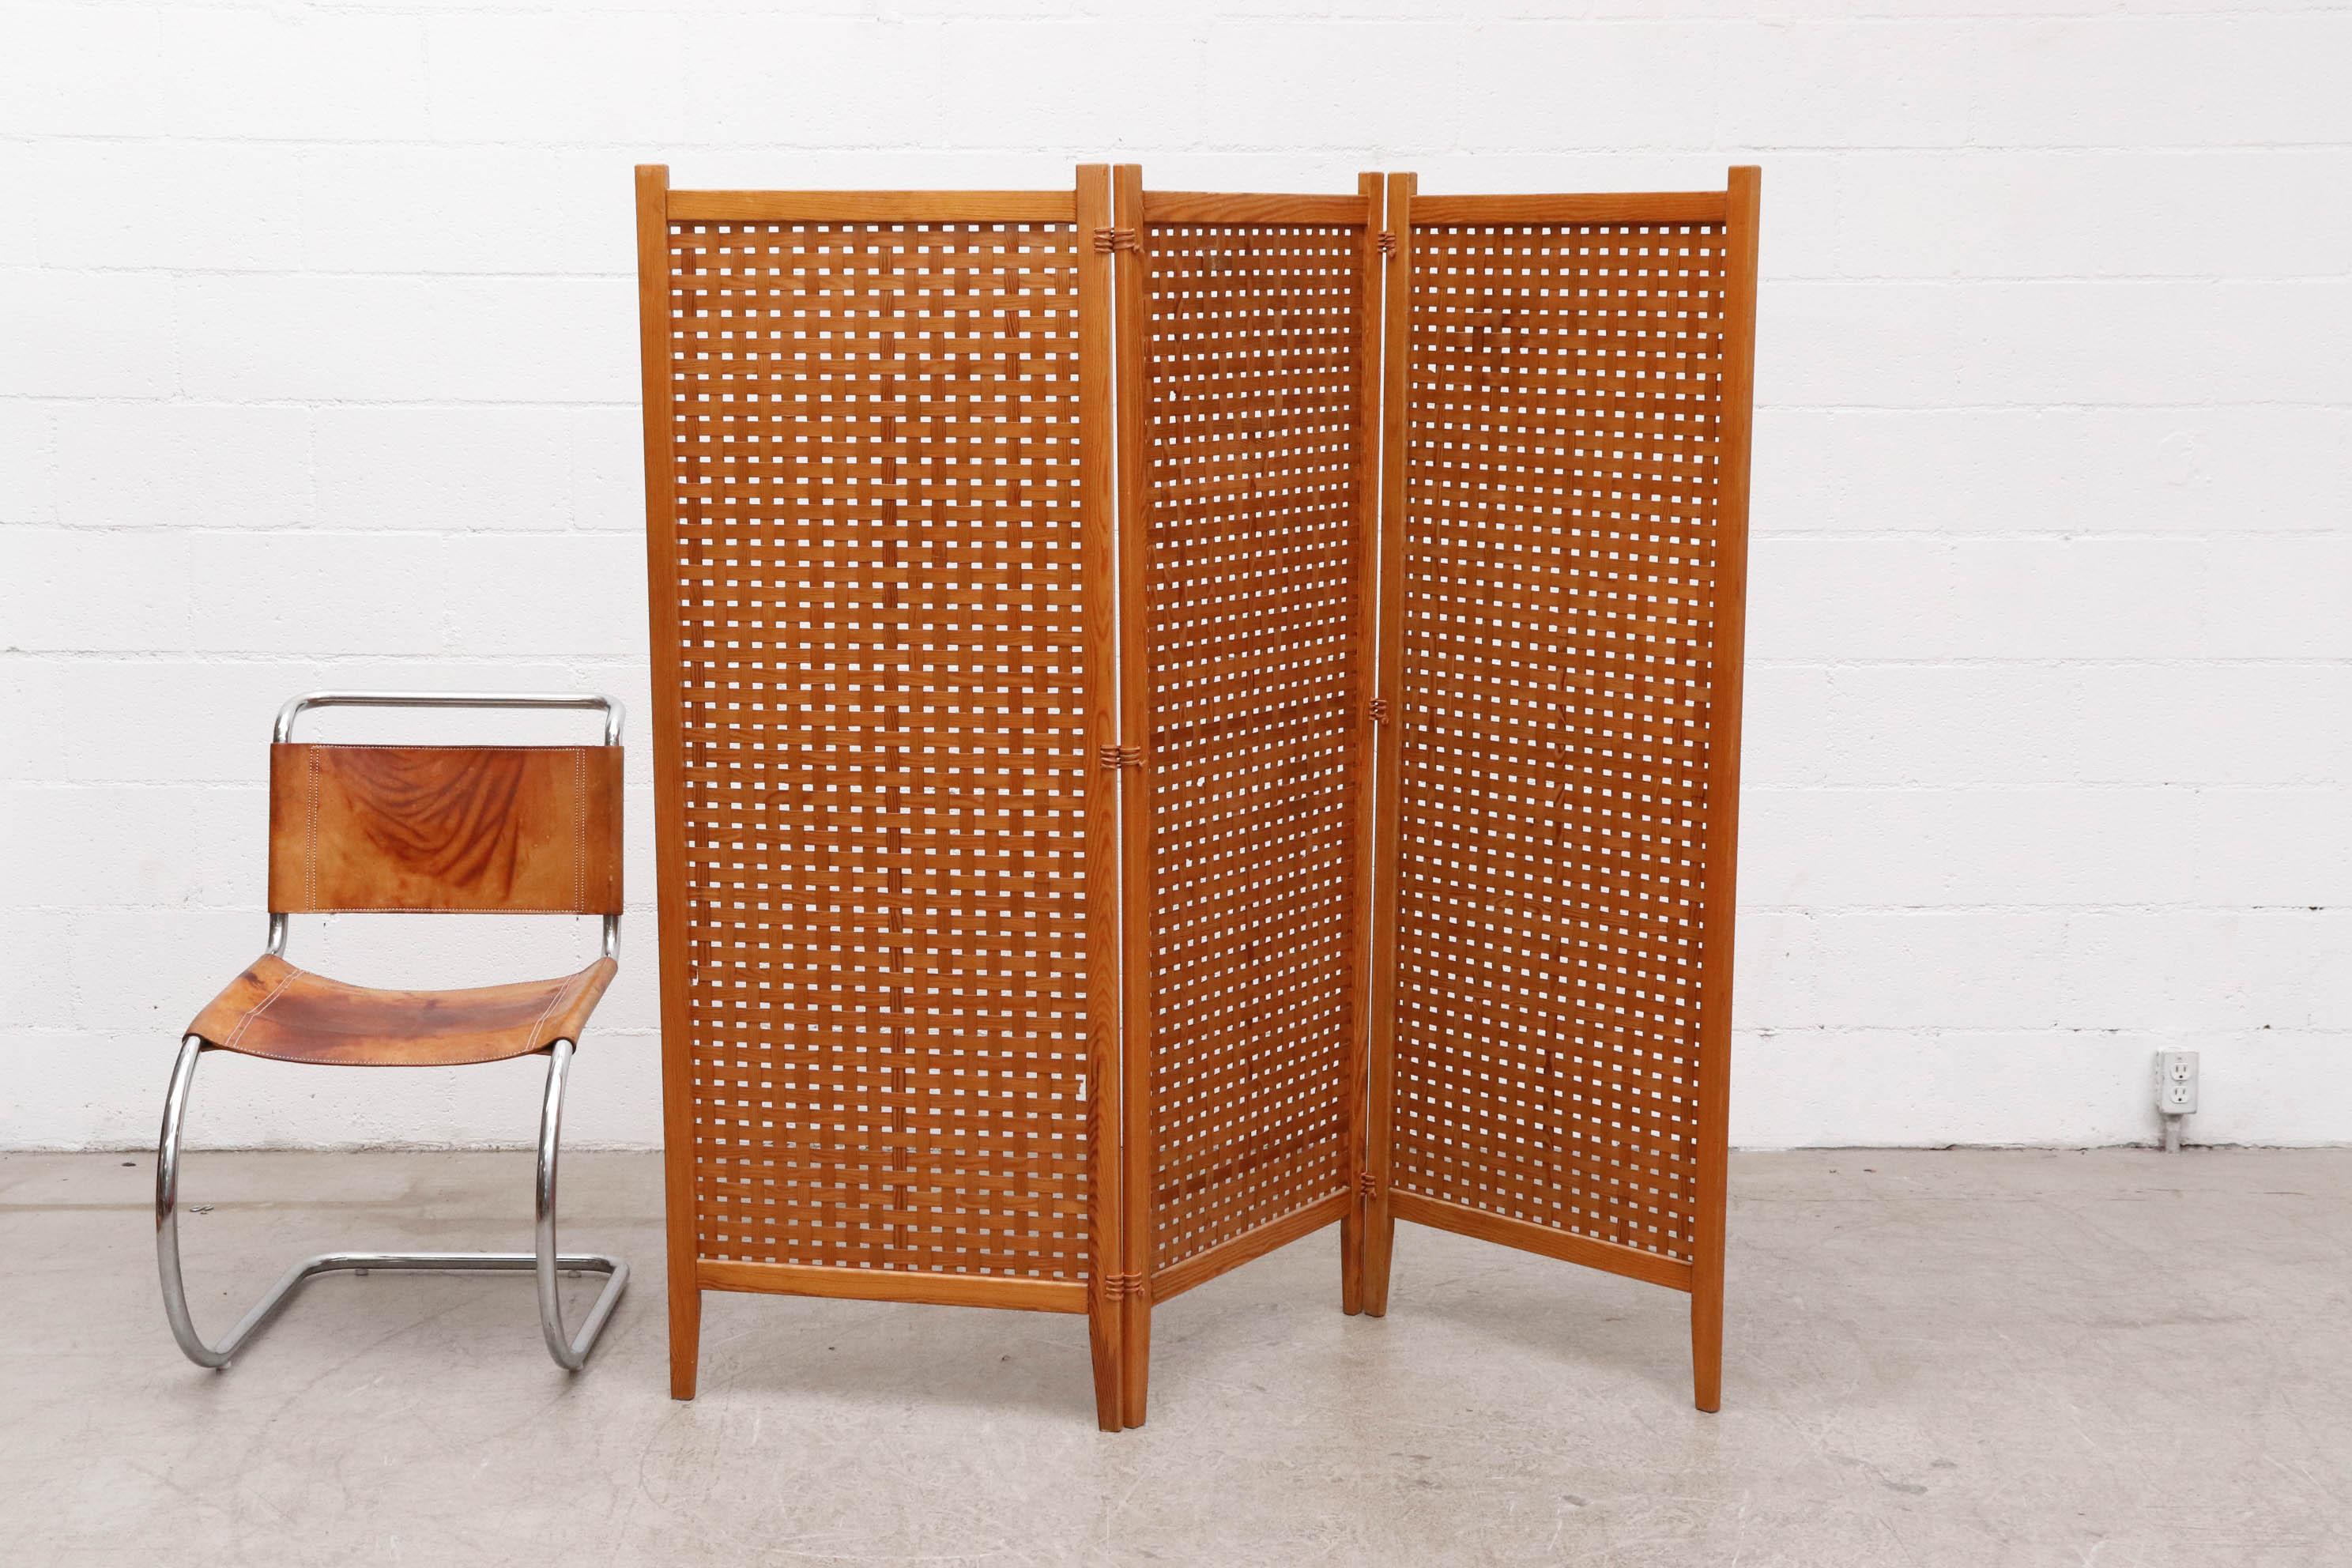 Lovely 3-panel midcentury room divider or privacy screen made with woven pine strips. Each panel is 23.625